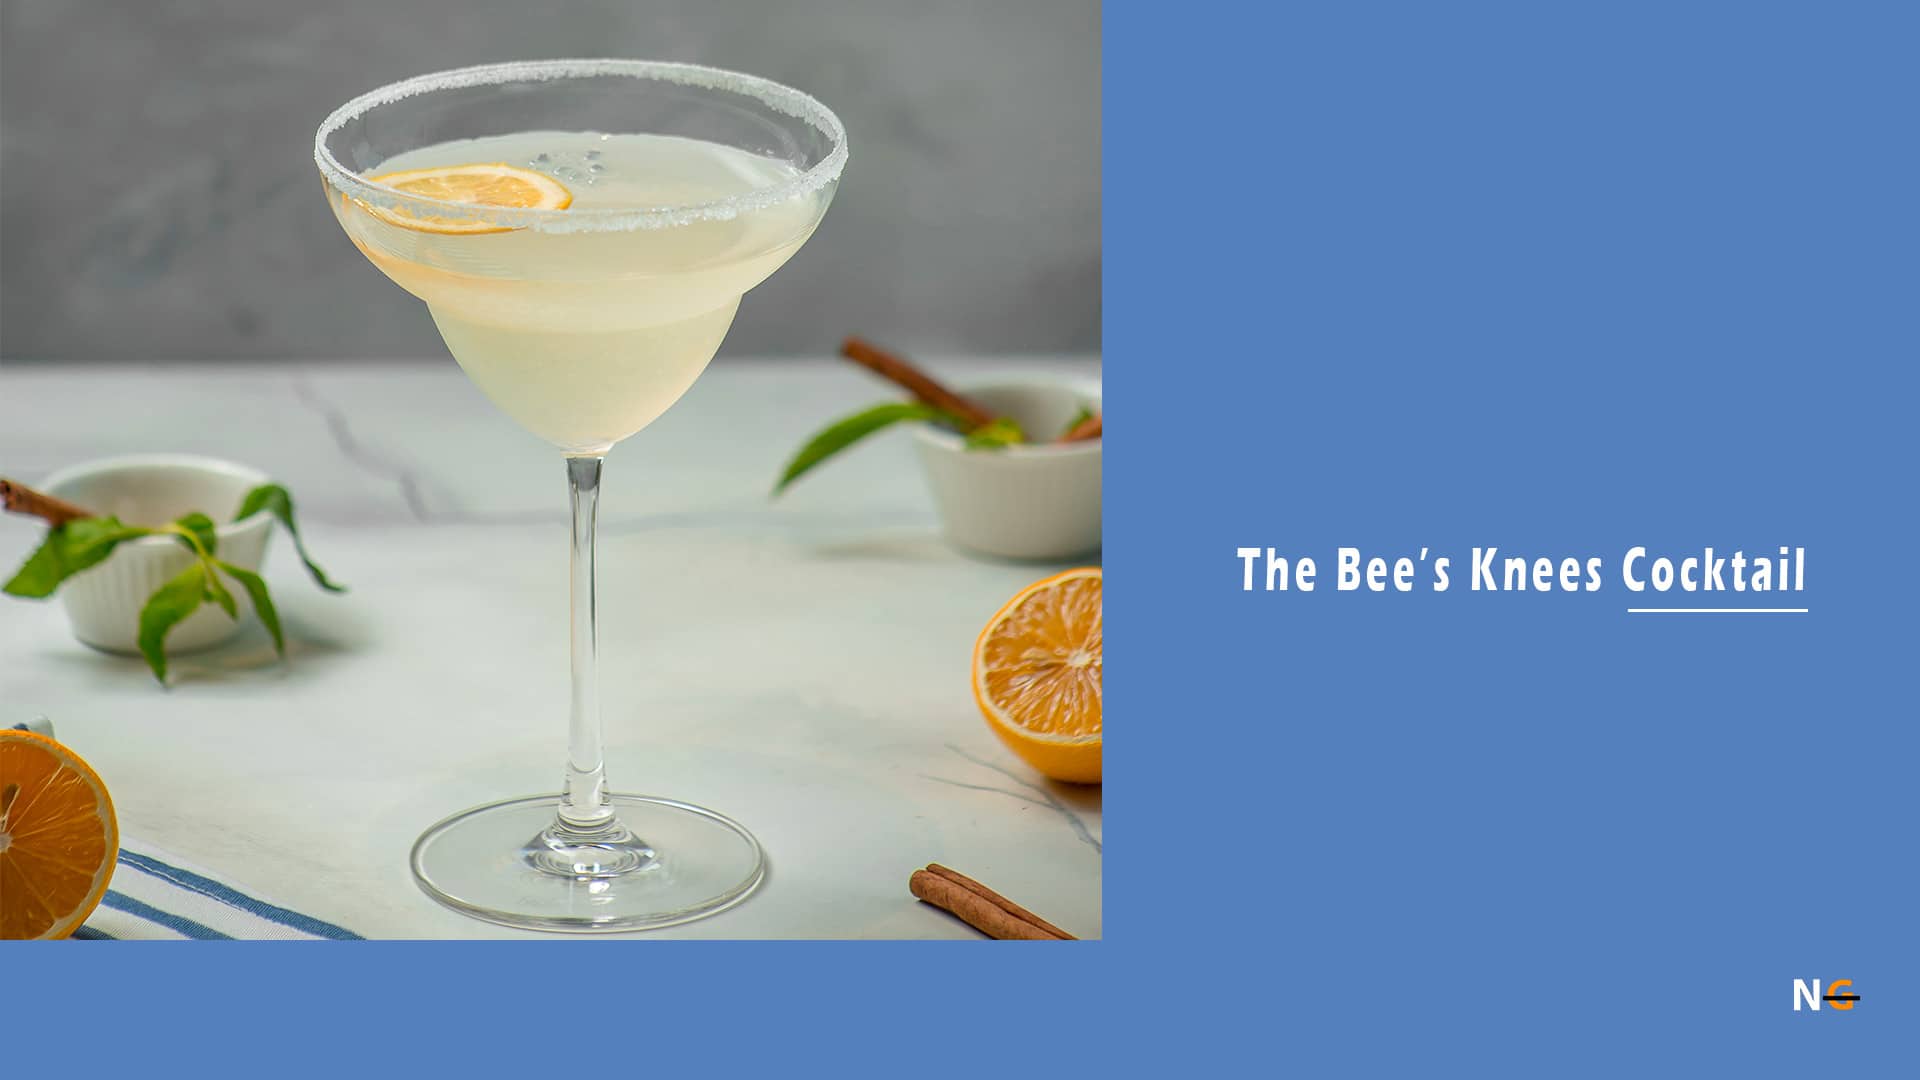 The Bee’s Knees Cocktail